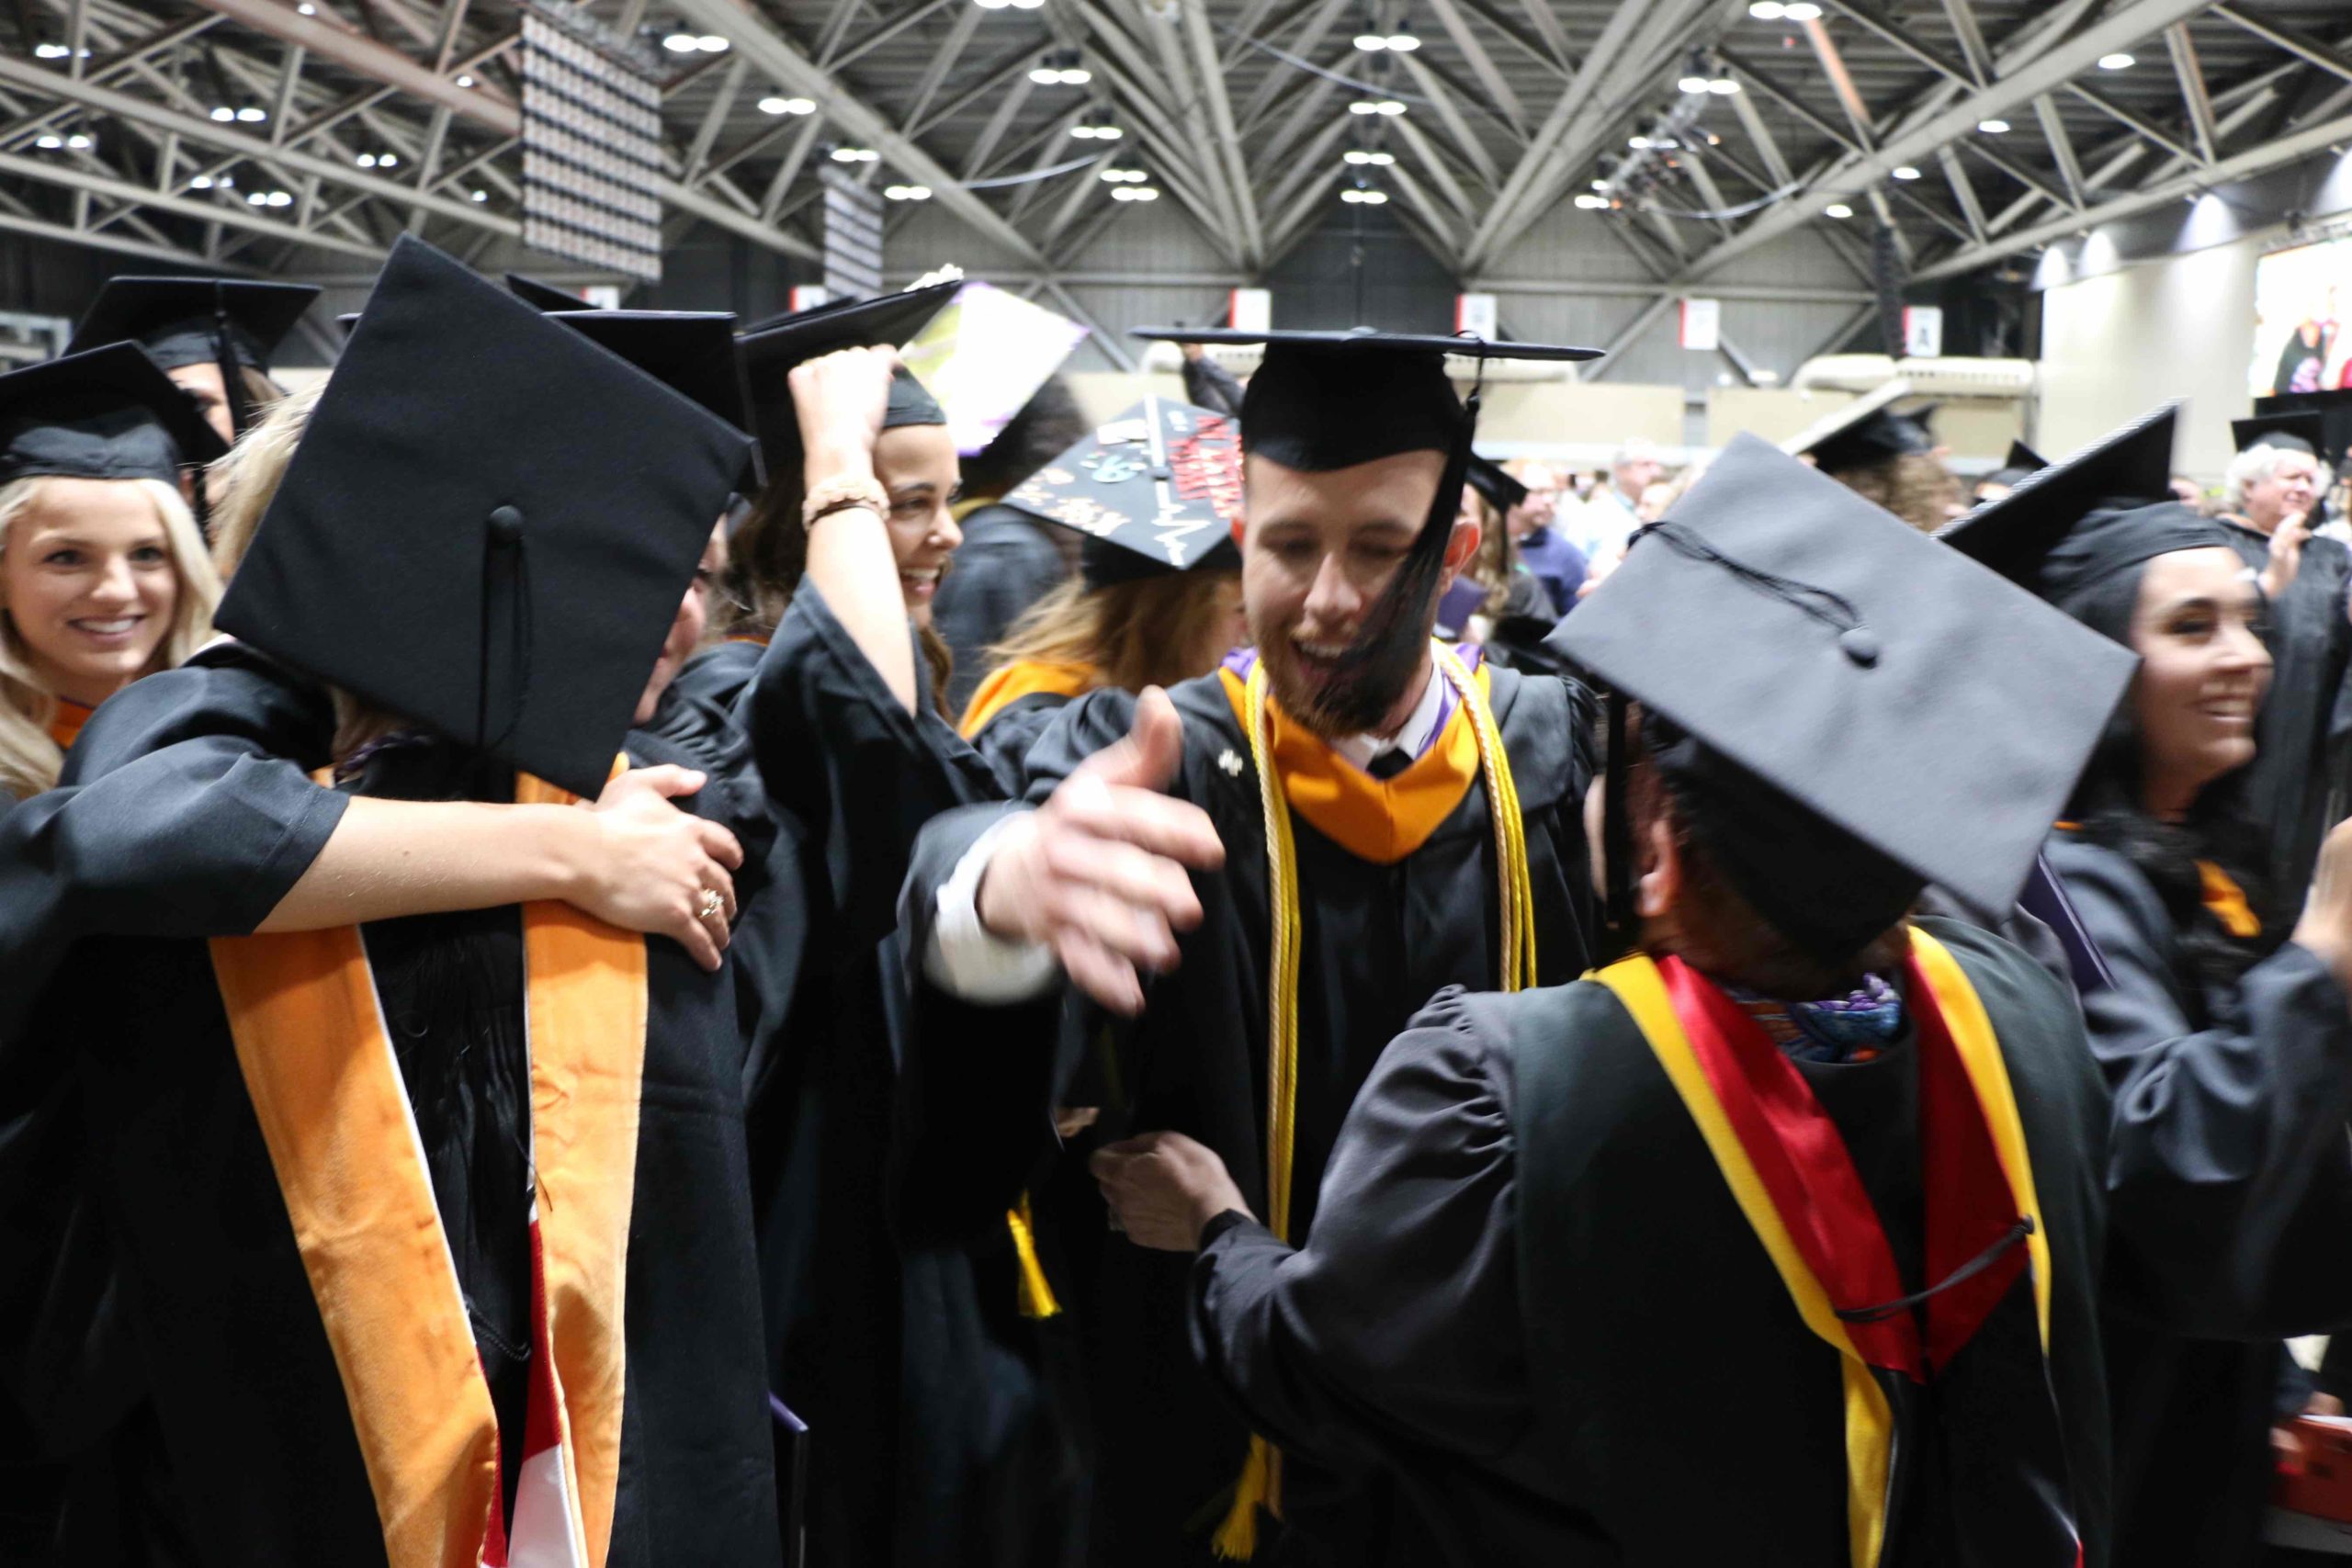 A group of students hugging in the reception line post-graduation